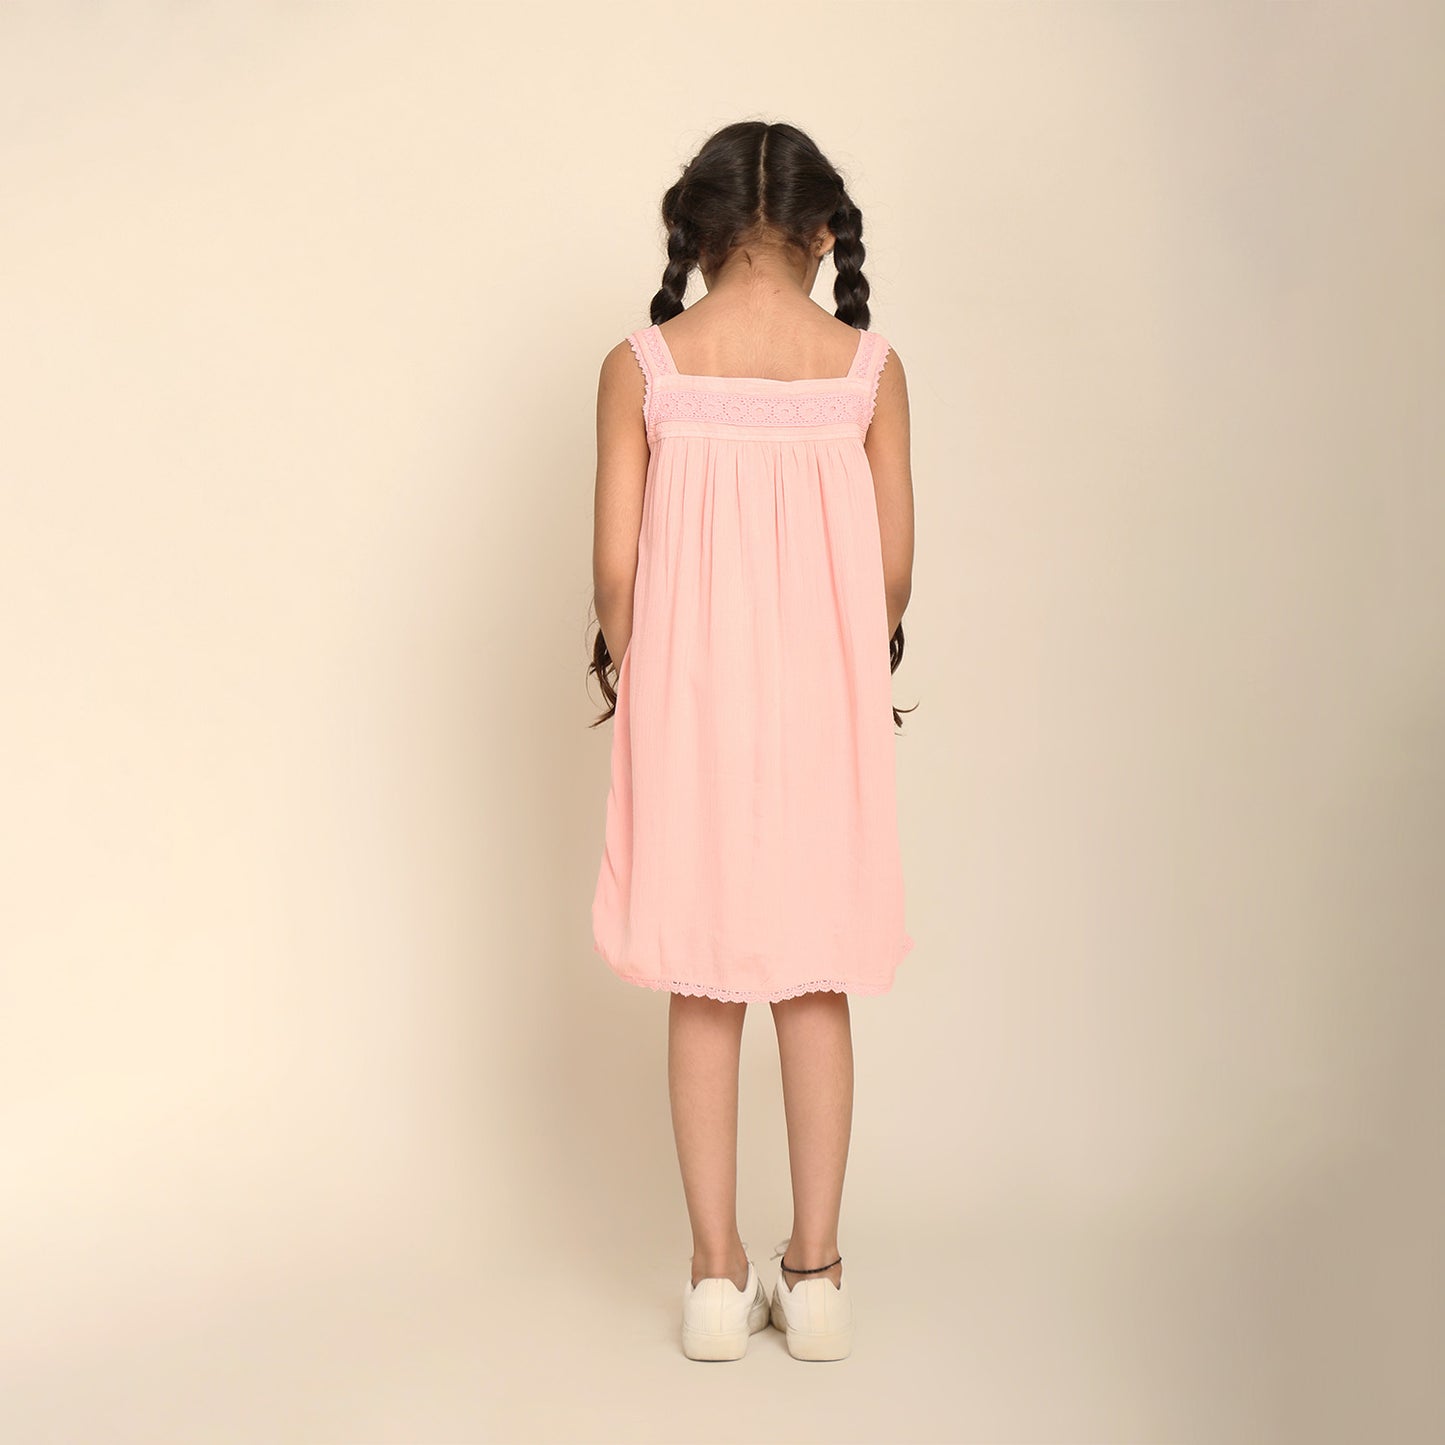 Cotton Candy Color Nightie for Girls